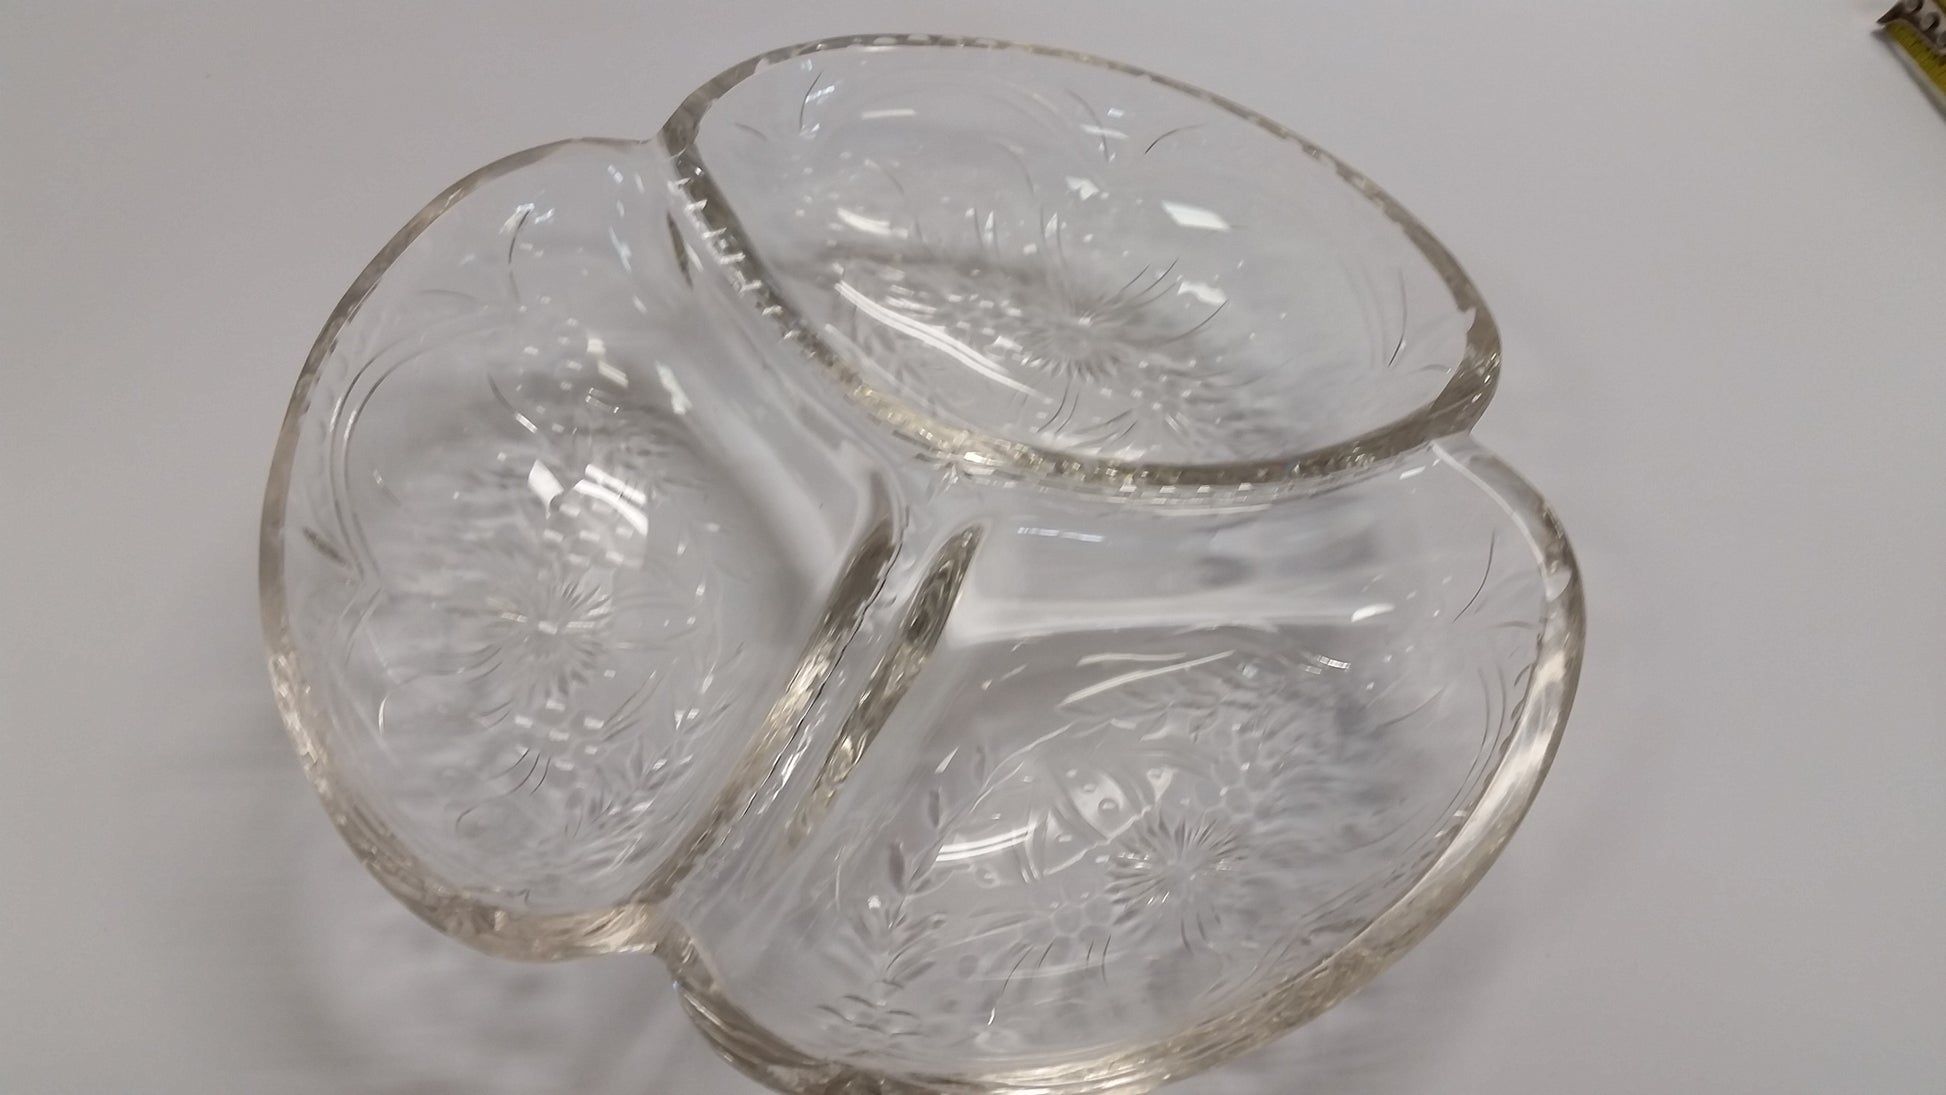 Hand cut crystal 3 section dish - O'Rourke crystal awards & gifts abp cut glass